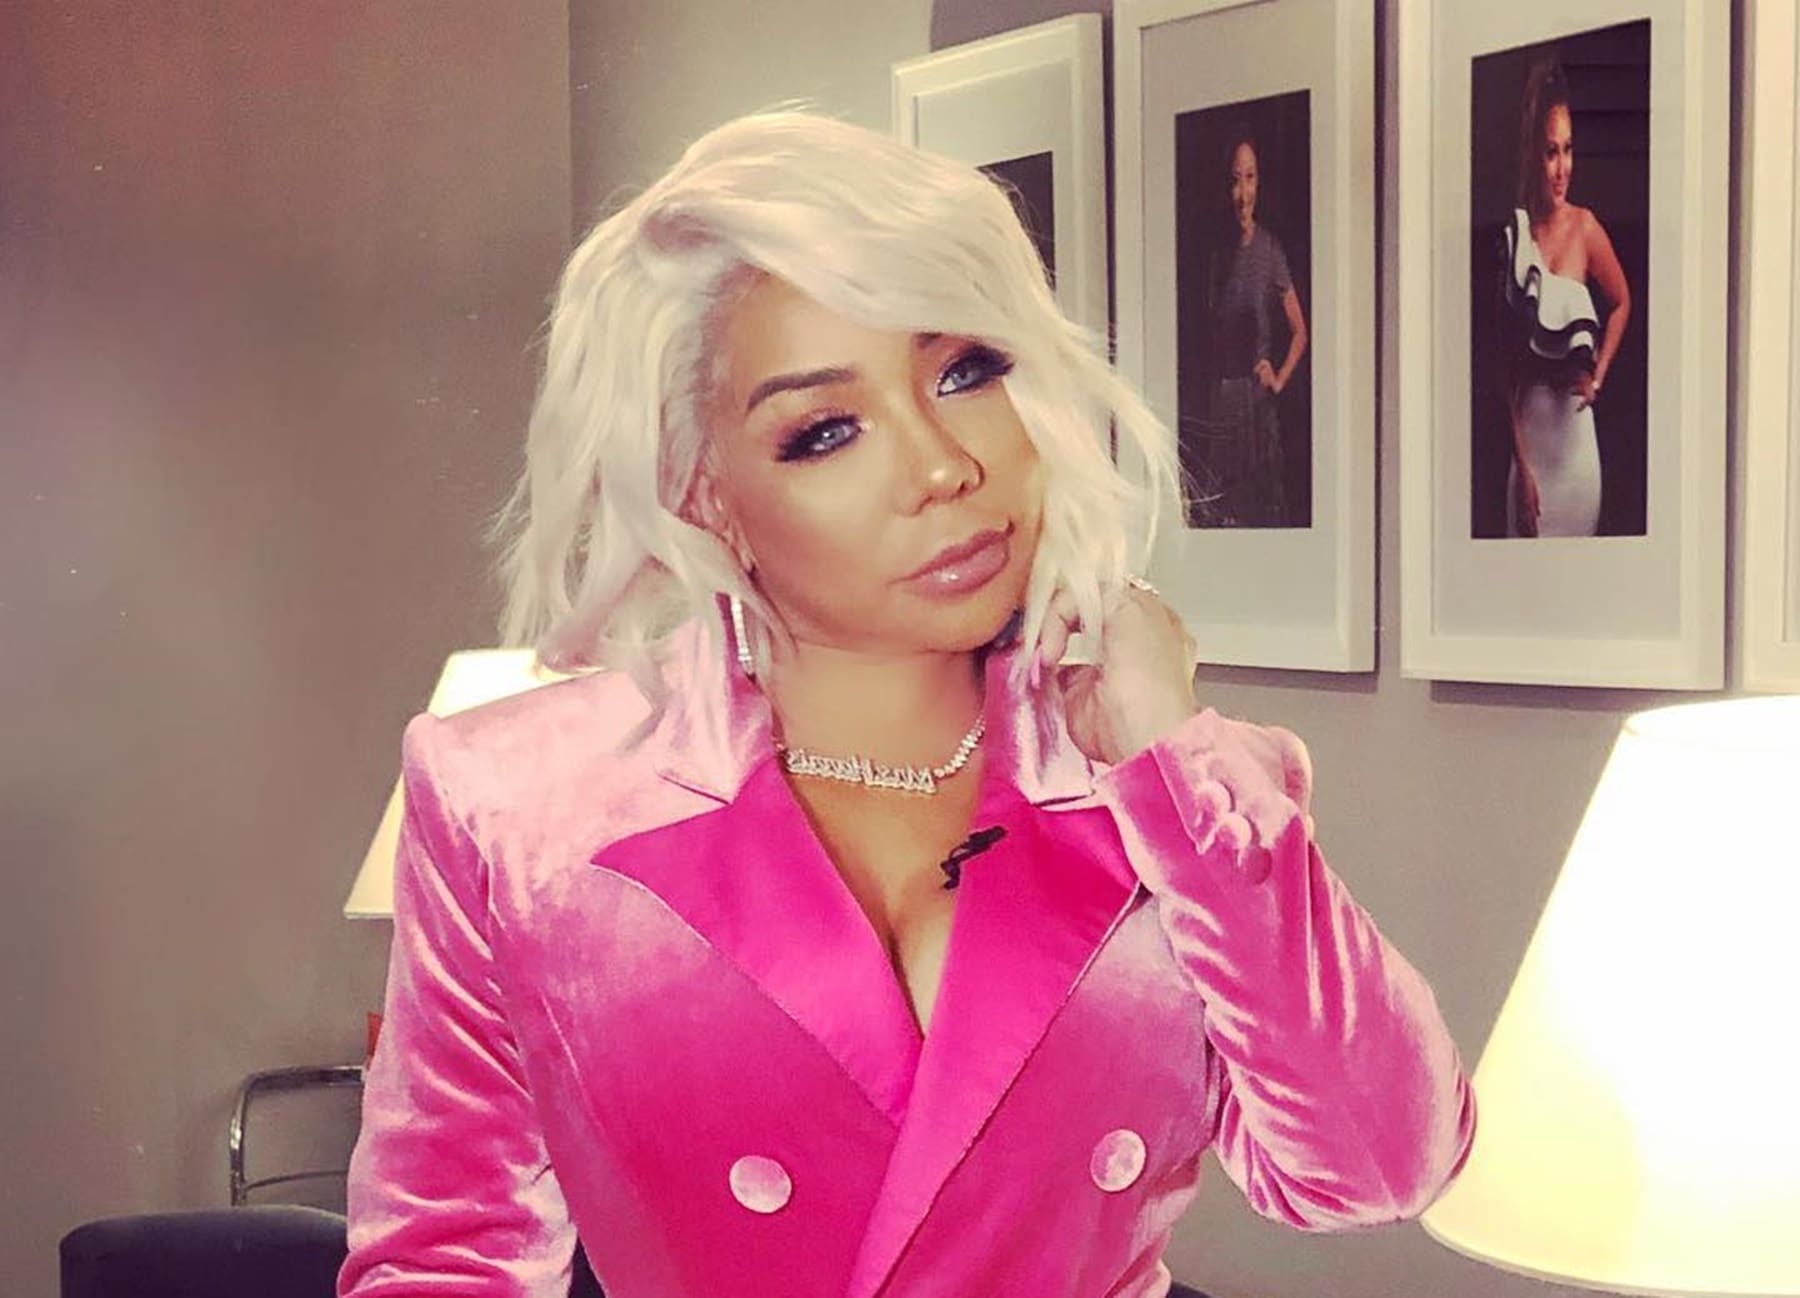 ”tiny-harris-finally-opens-up-about-kodak-black-calling-her-ugly-after-the-lauren-london-drama-t-i-took-things-personally-because-he-was-close-to-nipsey-hussle”